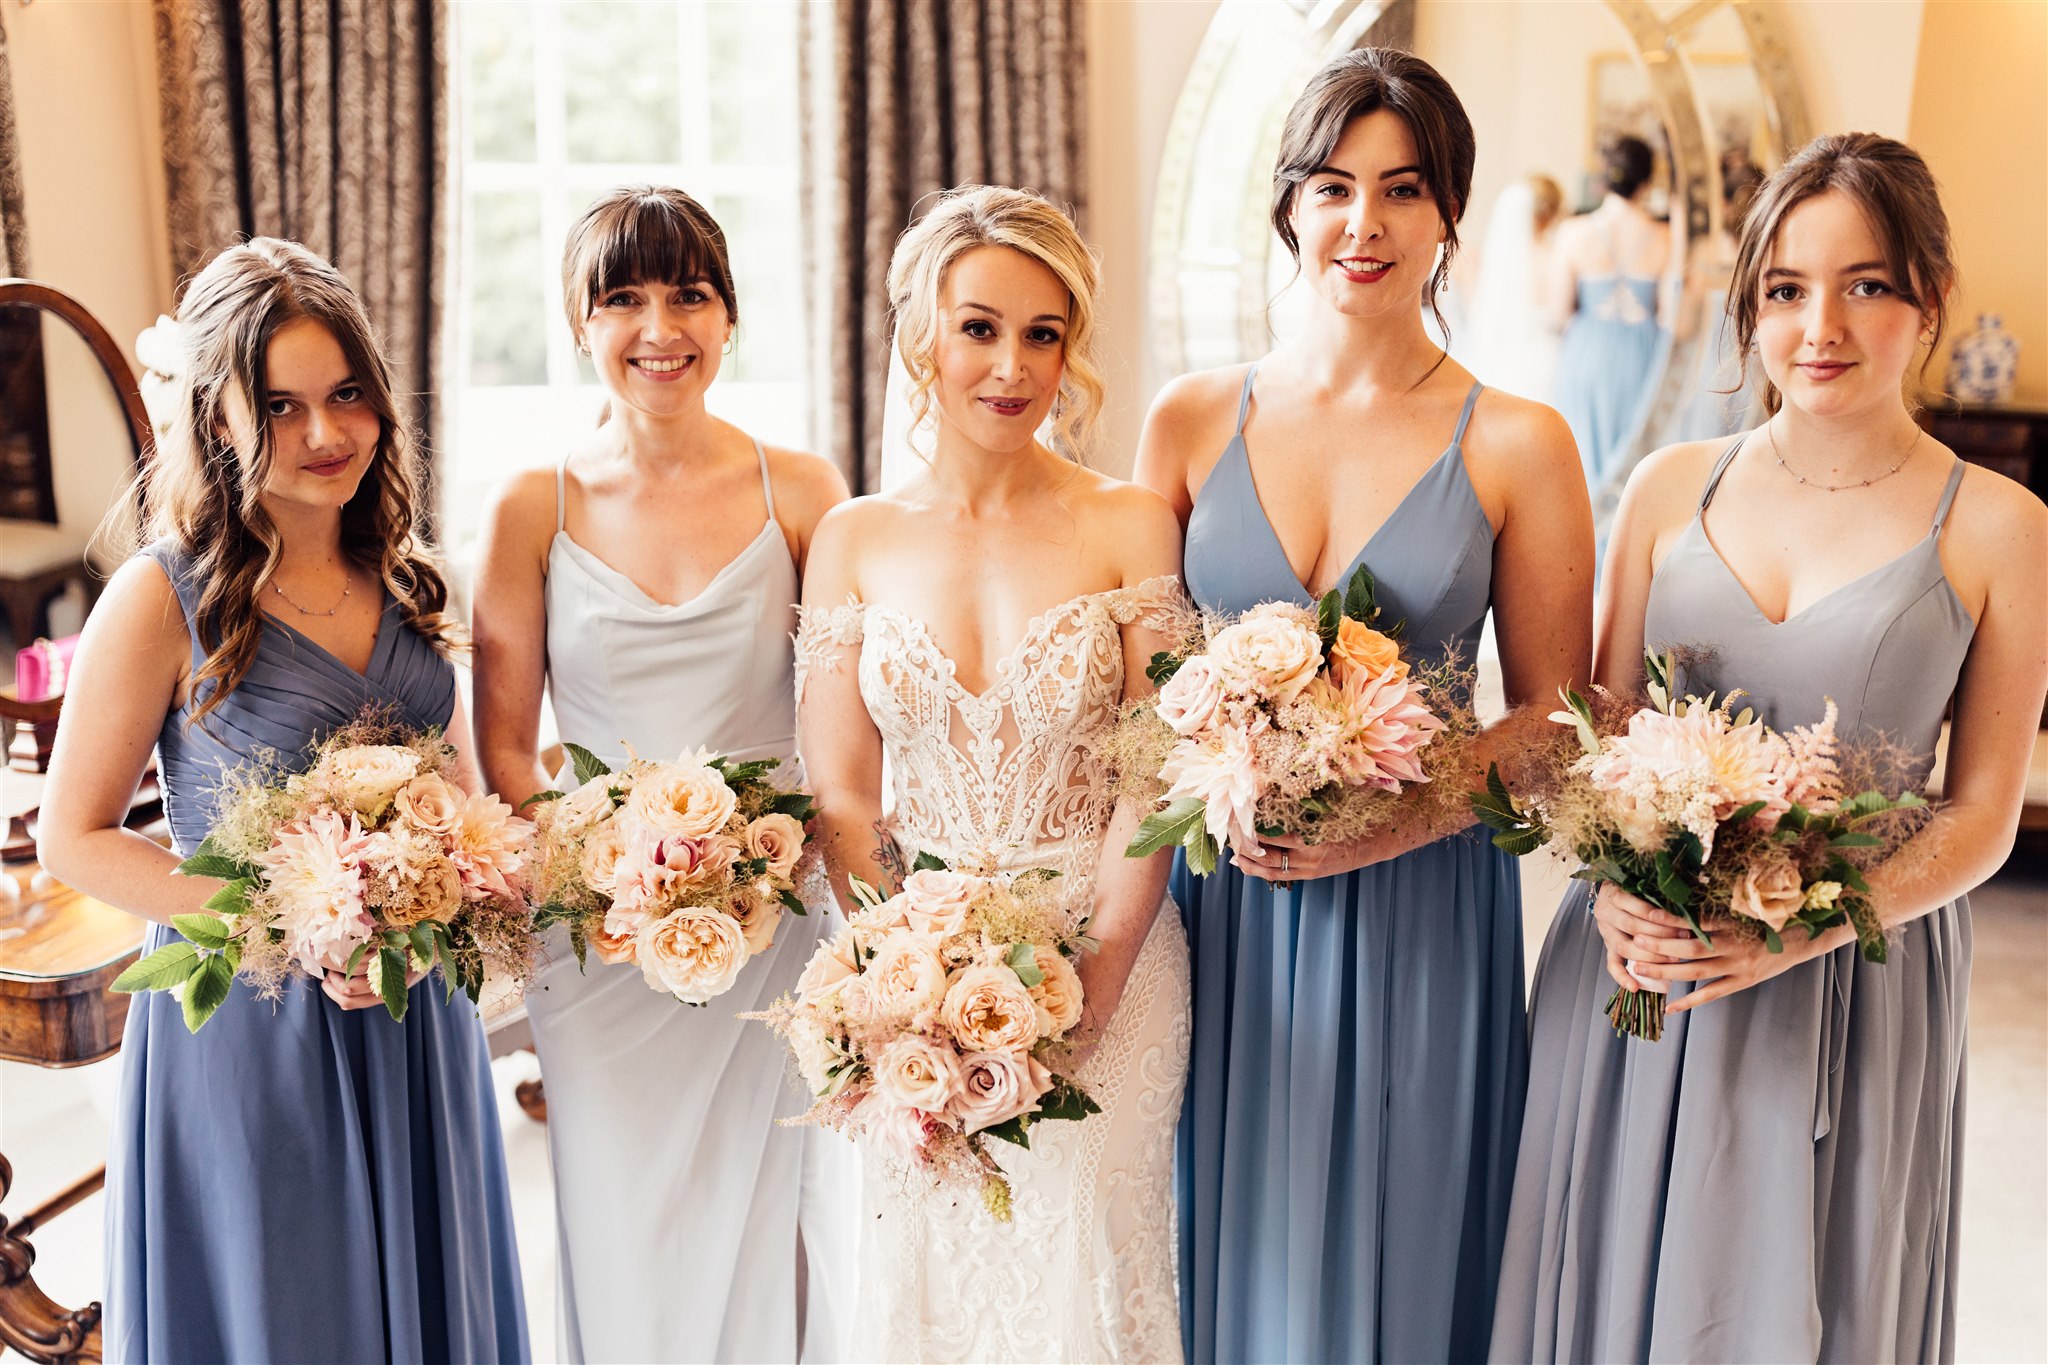 A bride wearing an off the shoulder white lace dress with blonde hair stands with two bridesmaids on either side of her. The bridesmaids wear blue floor length dresses and all five women are holding blush pink bouquets made up of dahlias and roses.